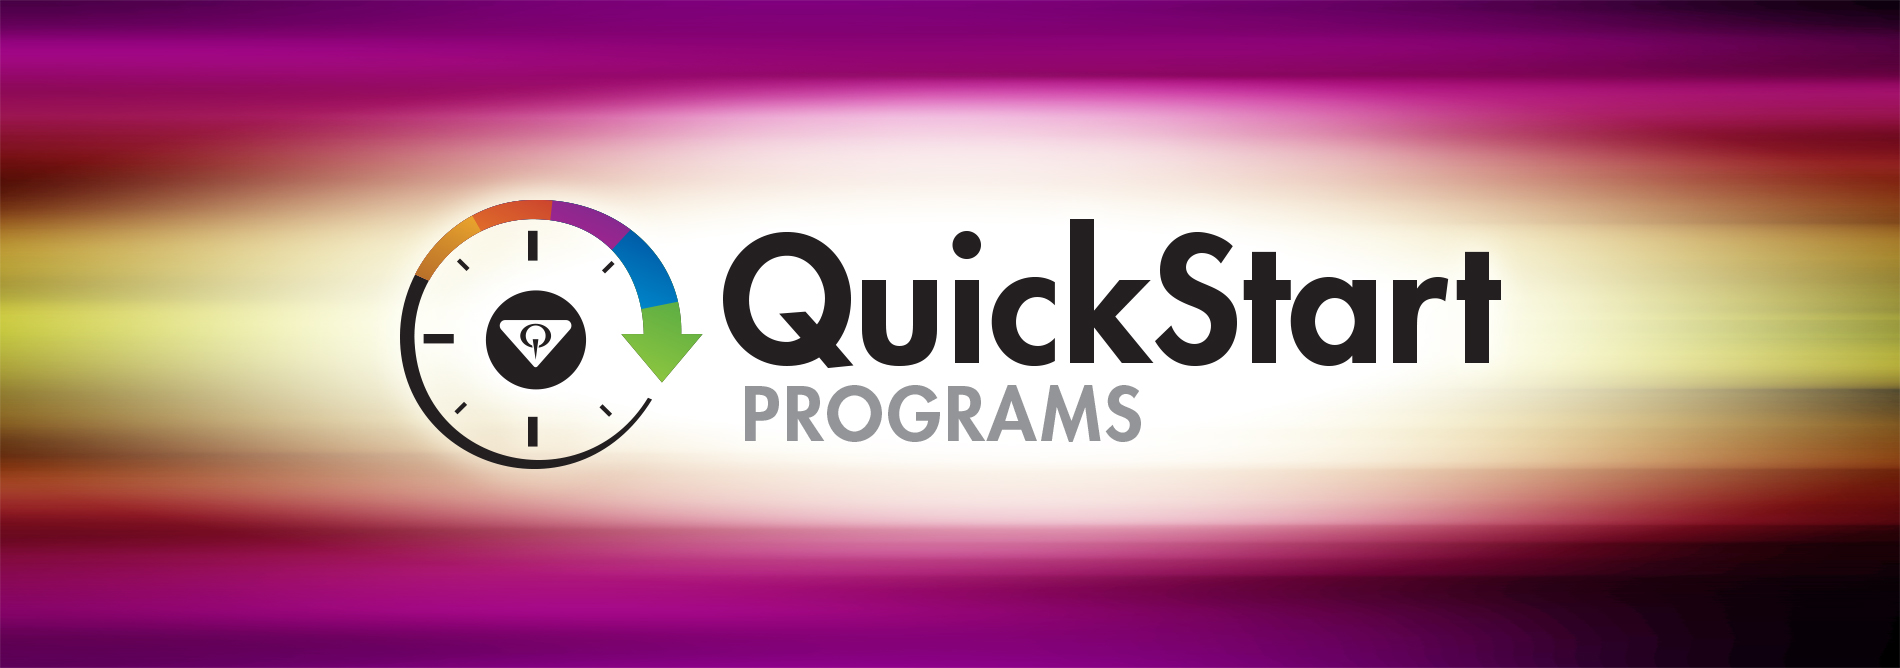 QubicaAMF-bowling-products-scoring-quick-start-programs-banner.jpg